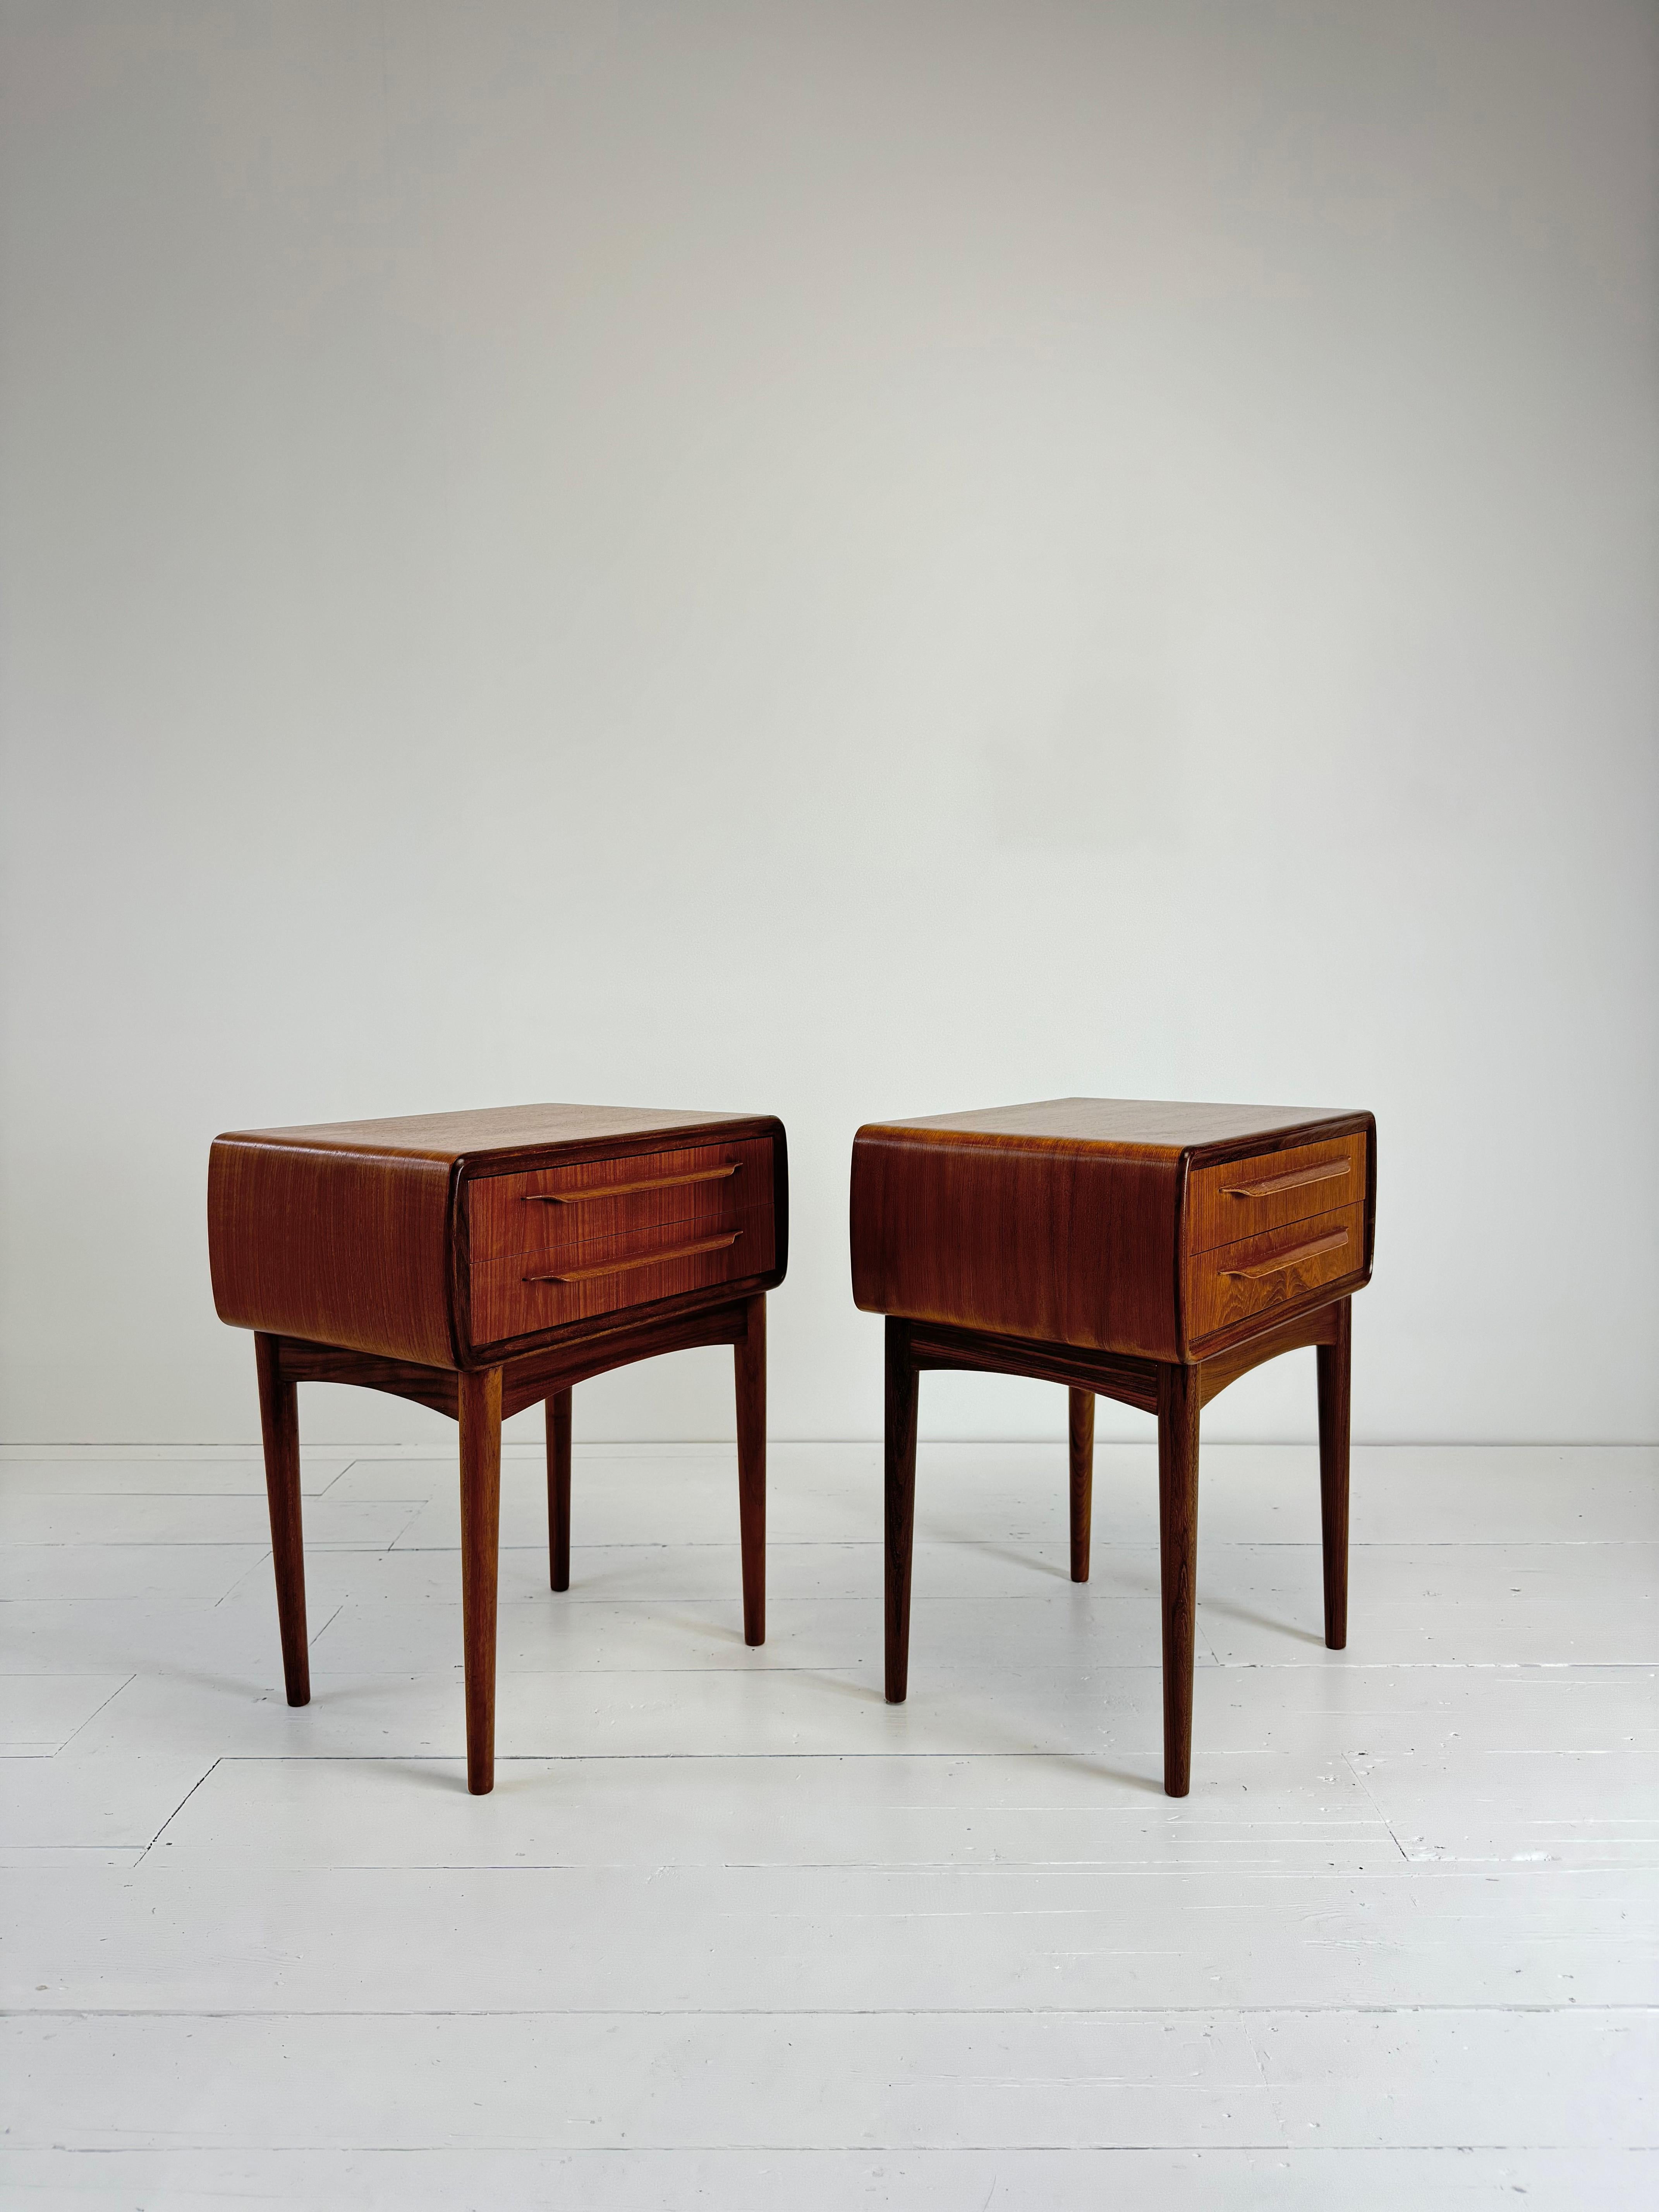 A touch of mid-century elegance for the bedroom with these stunning pair of teak Night Stands by Johaness Andersen for Silkborg Møbelfabrik, crafted in Denmark in the 1960s, these distinctive and rare pieces, feature the clean sumptuous lines and